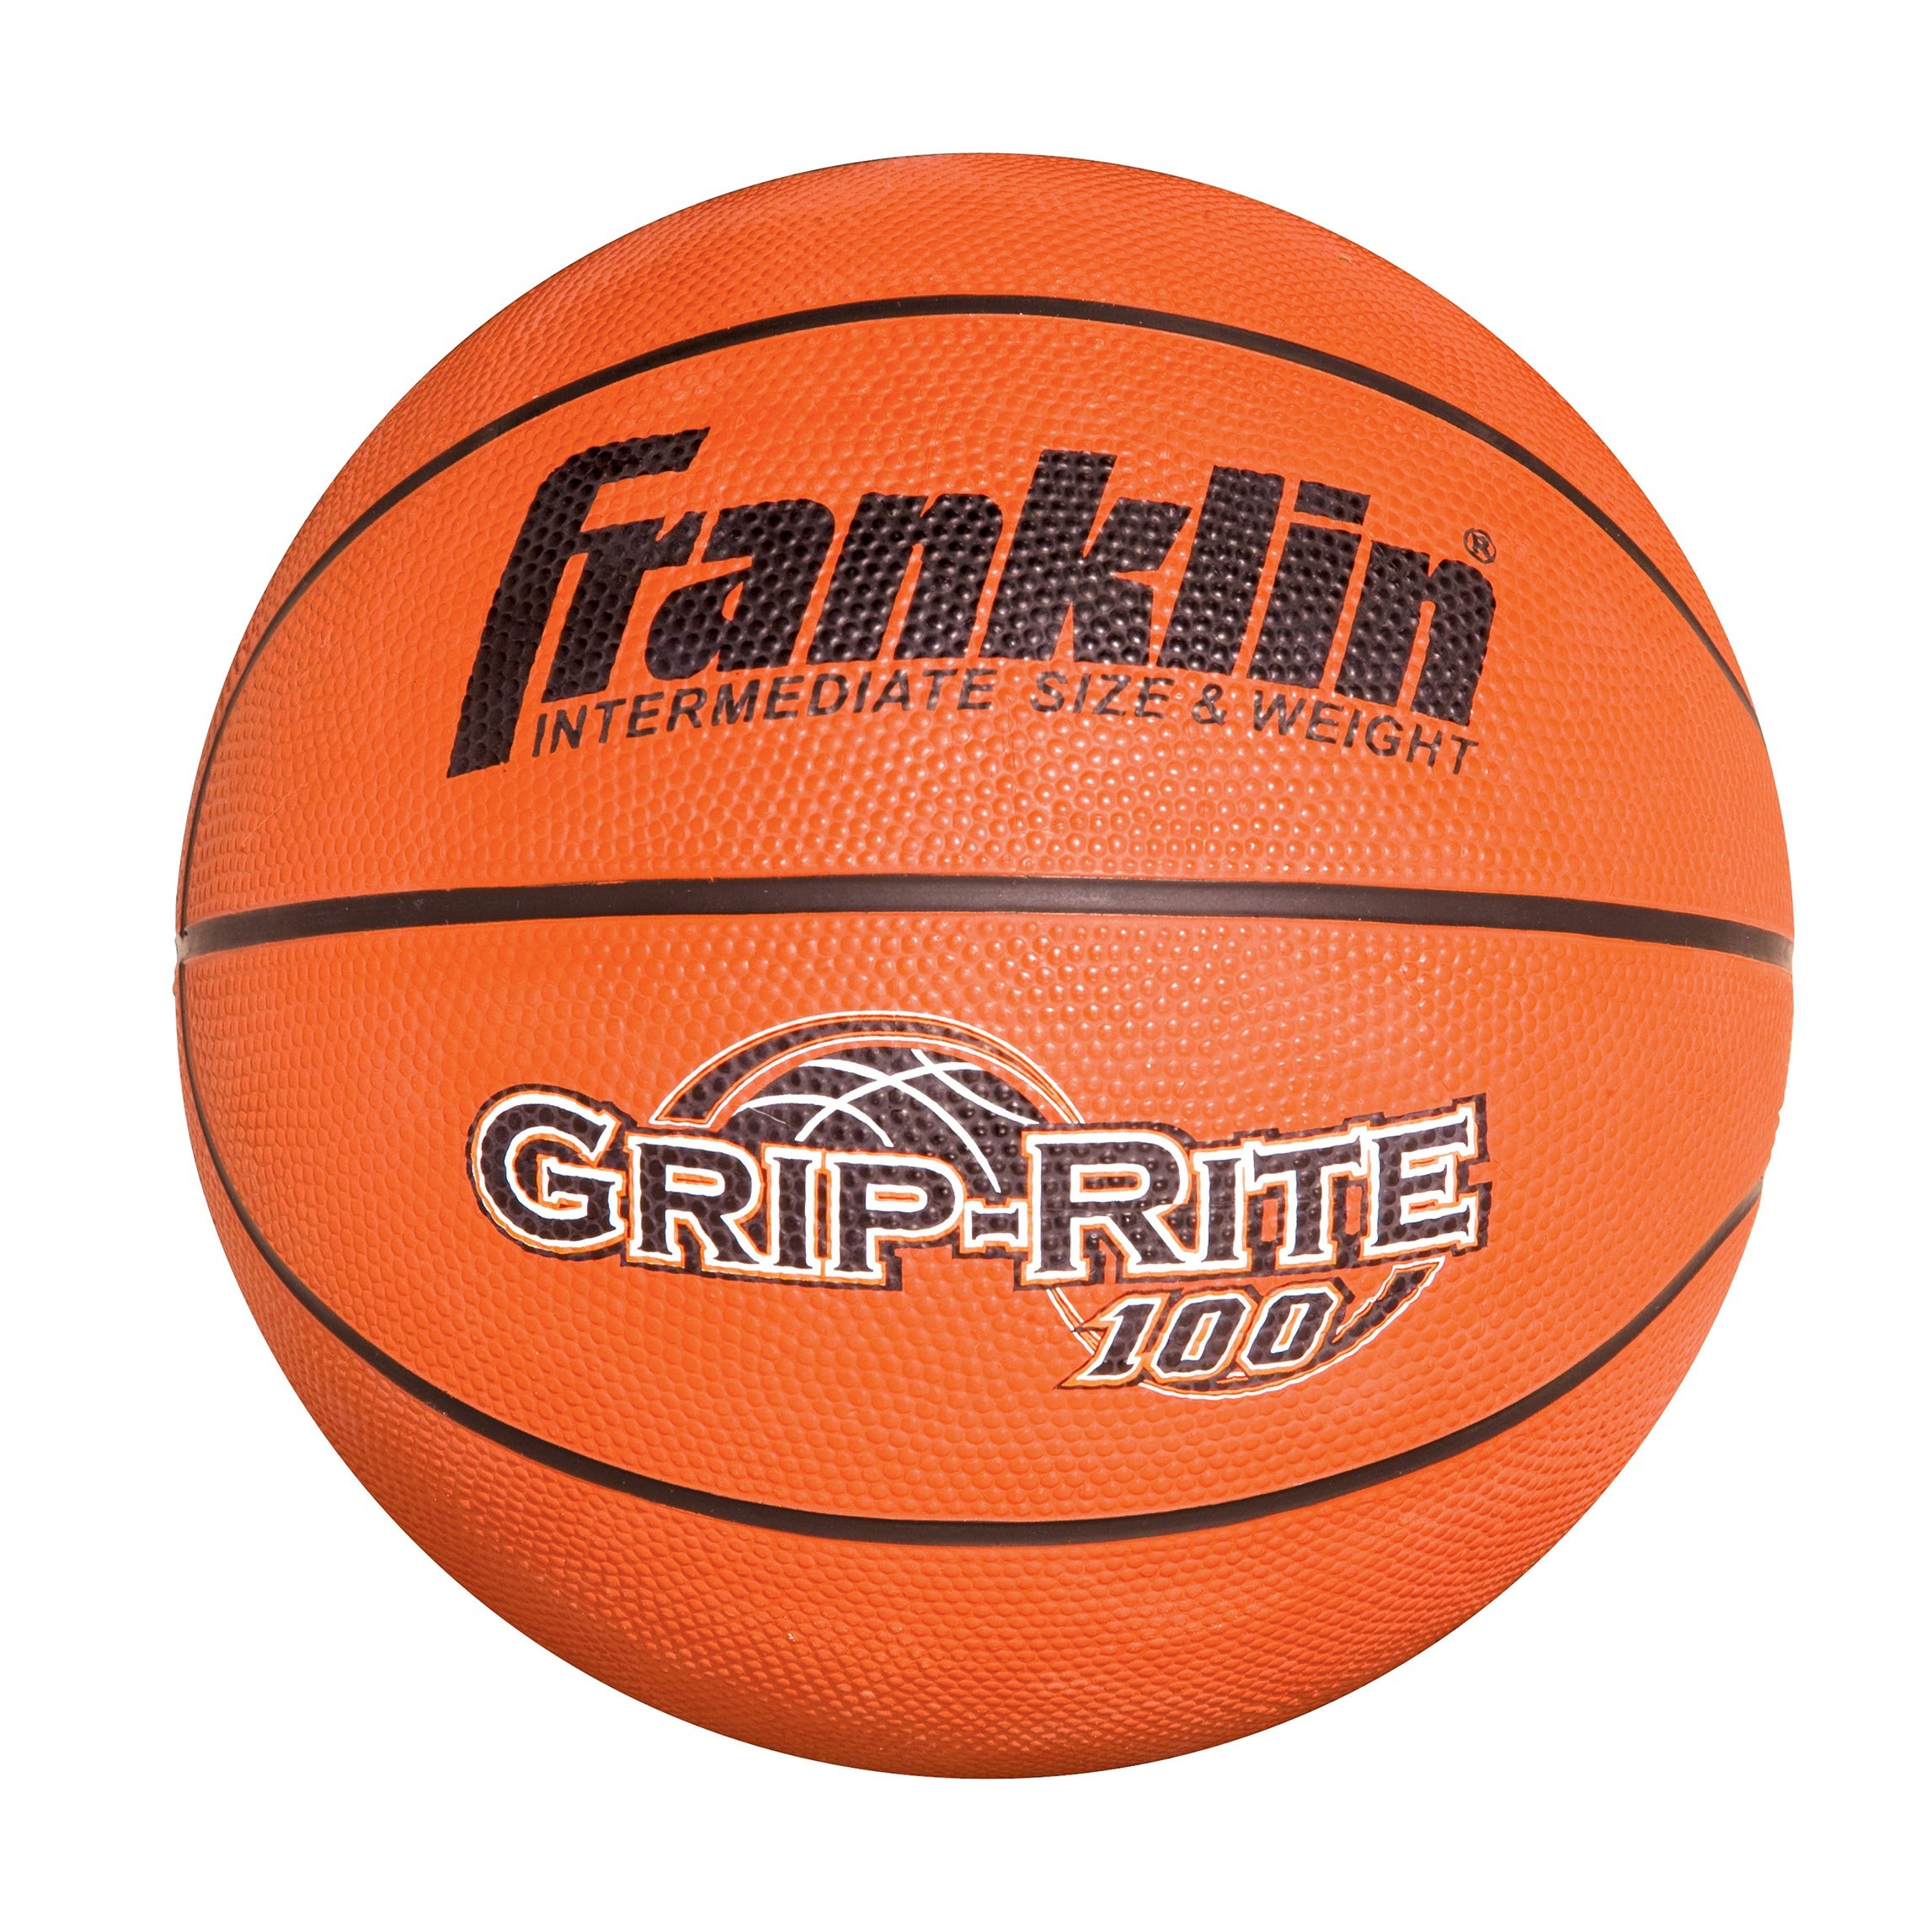 GRIP-RITE Official Size B7 Basketball - Deflated